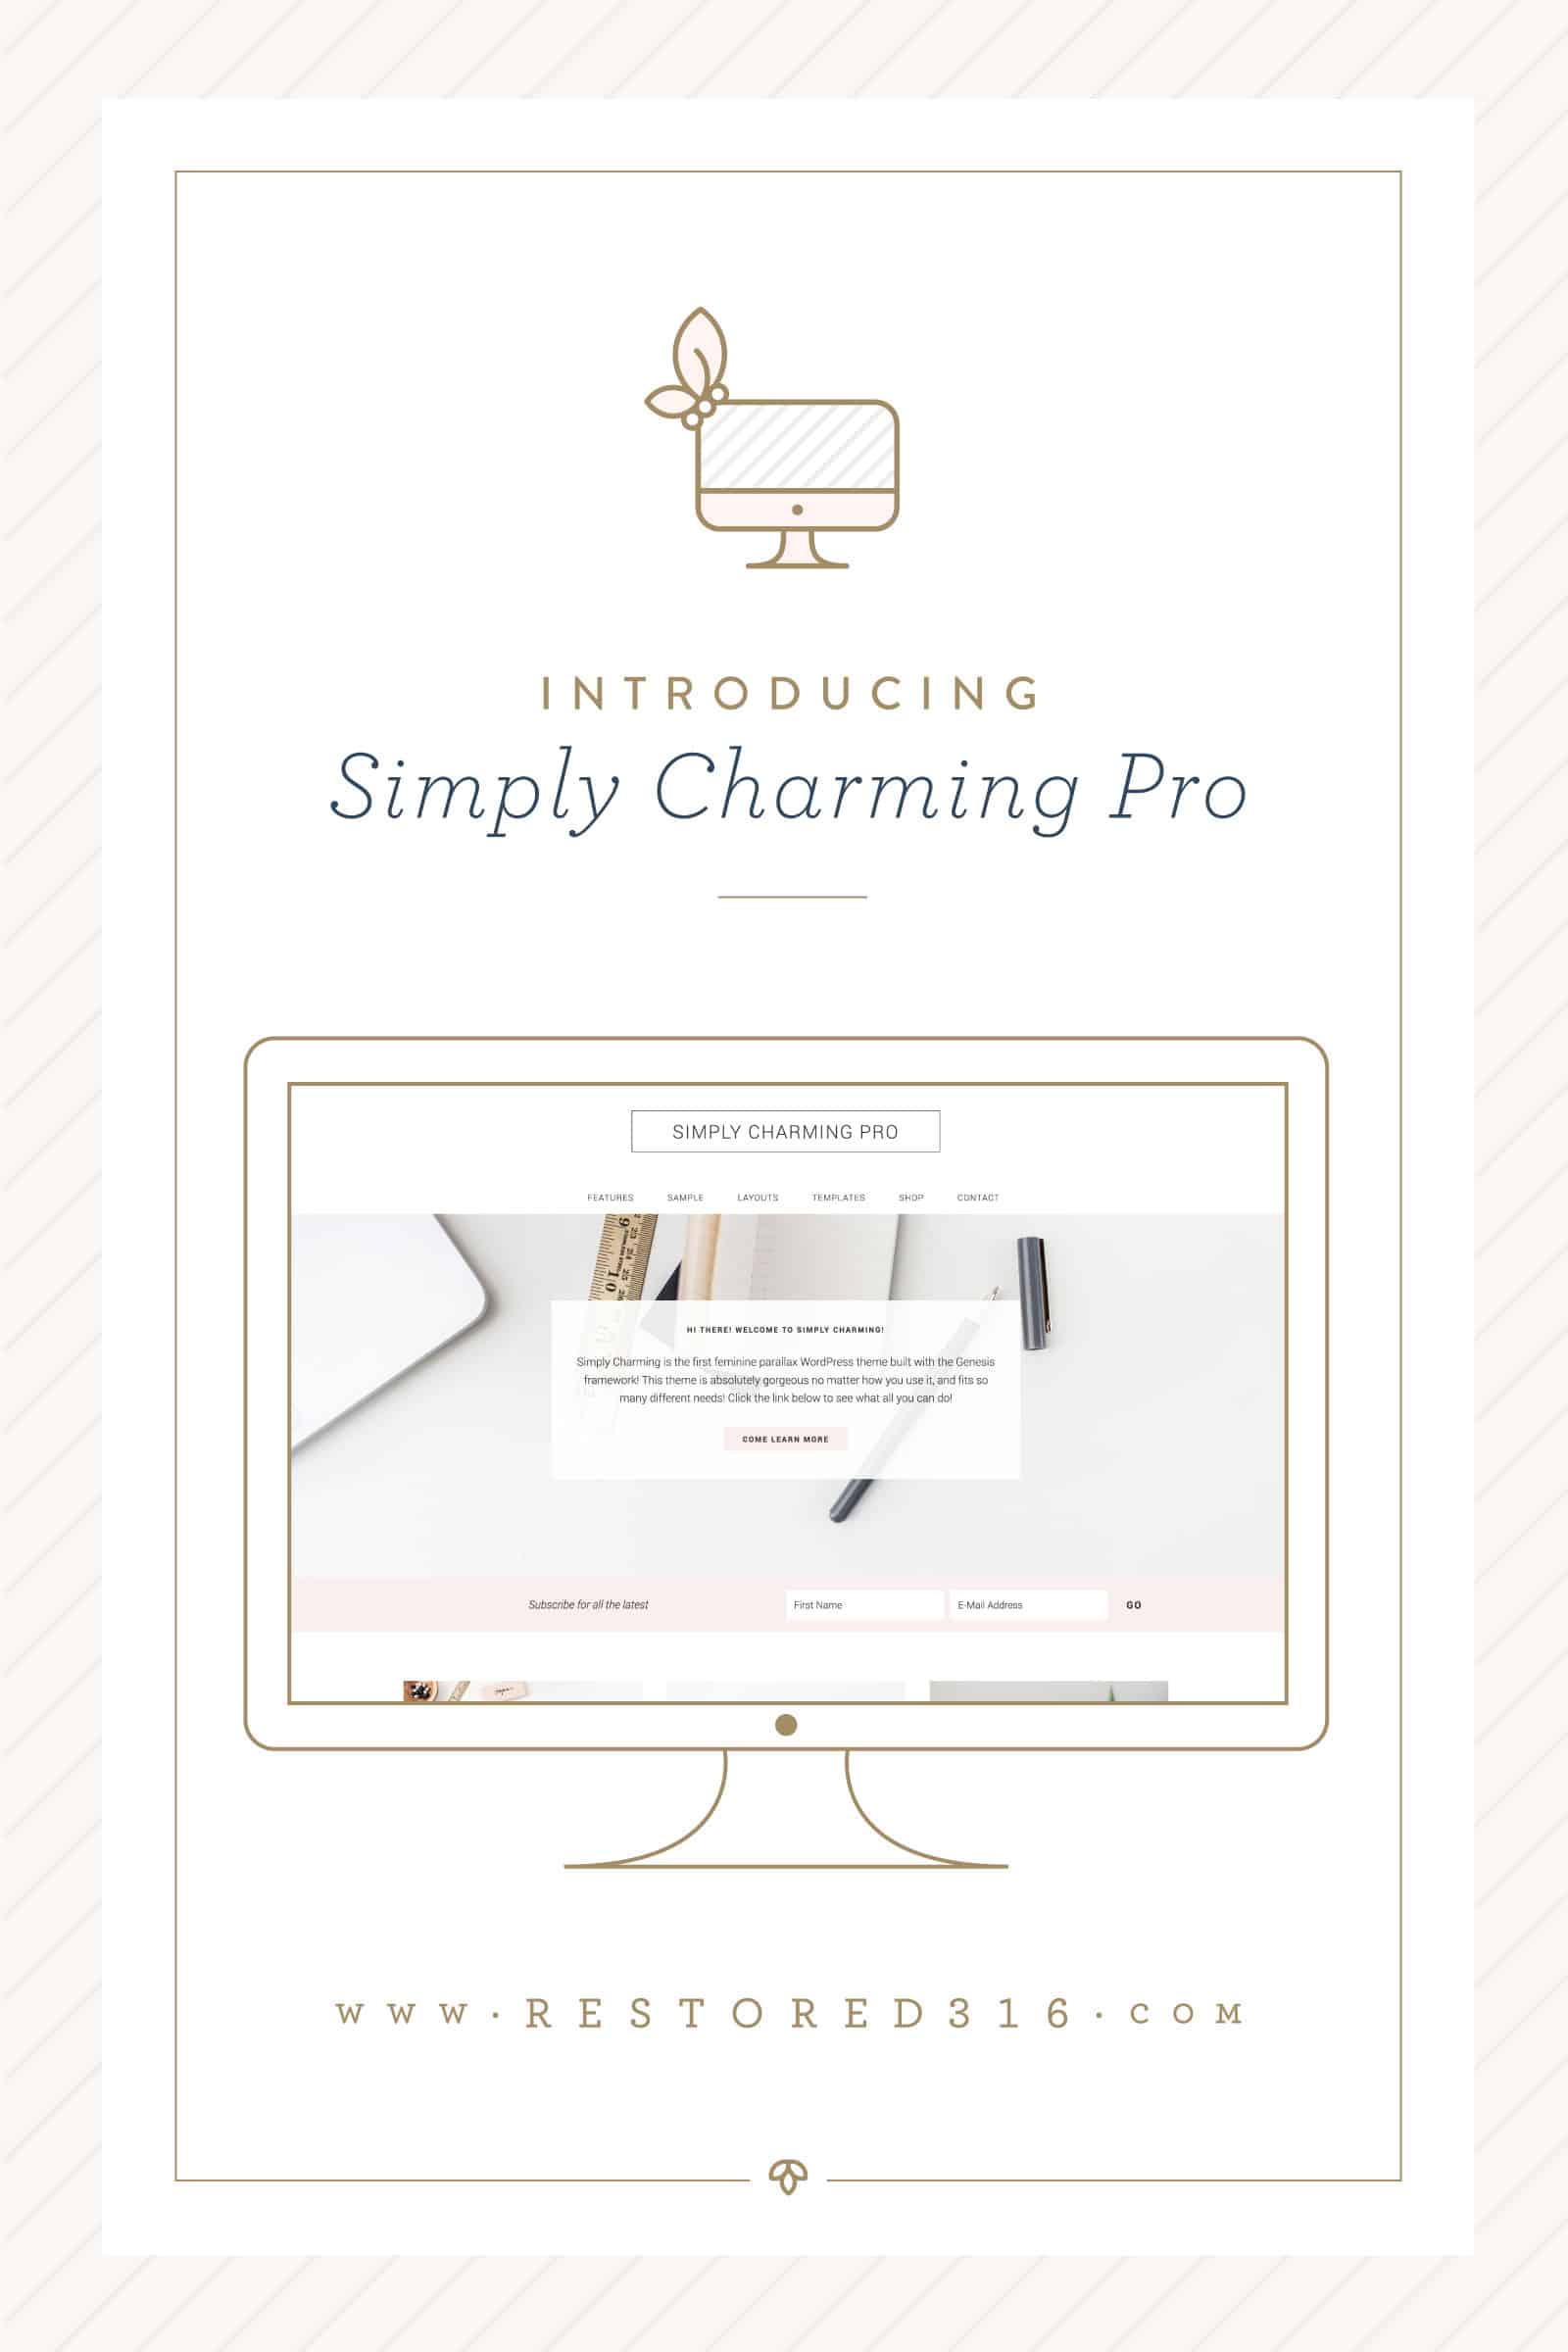 Introducing Simply Charming Pro